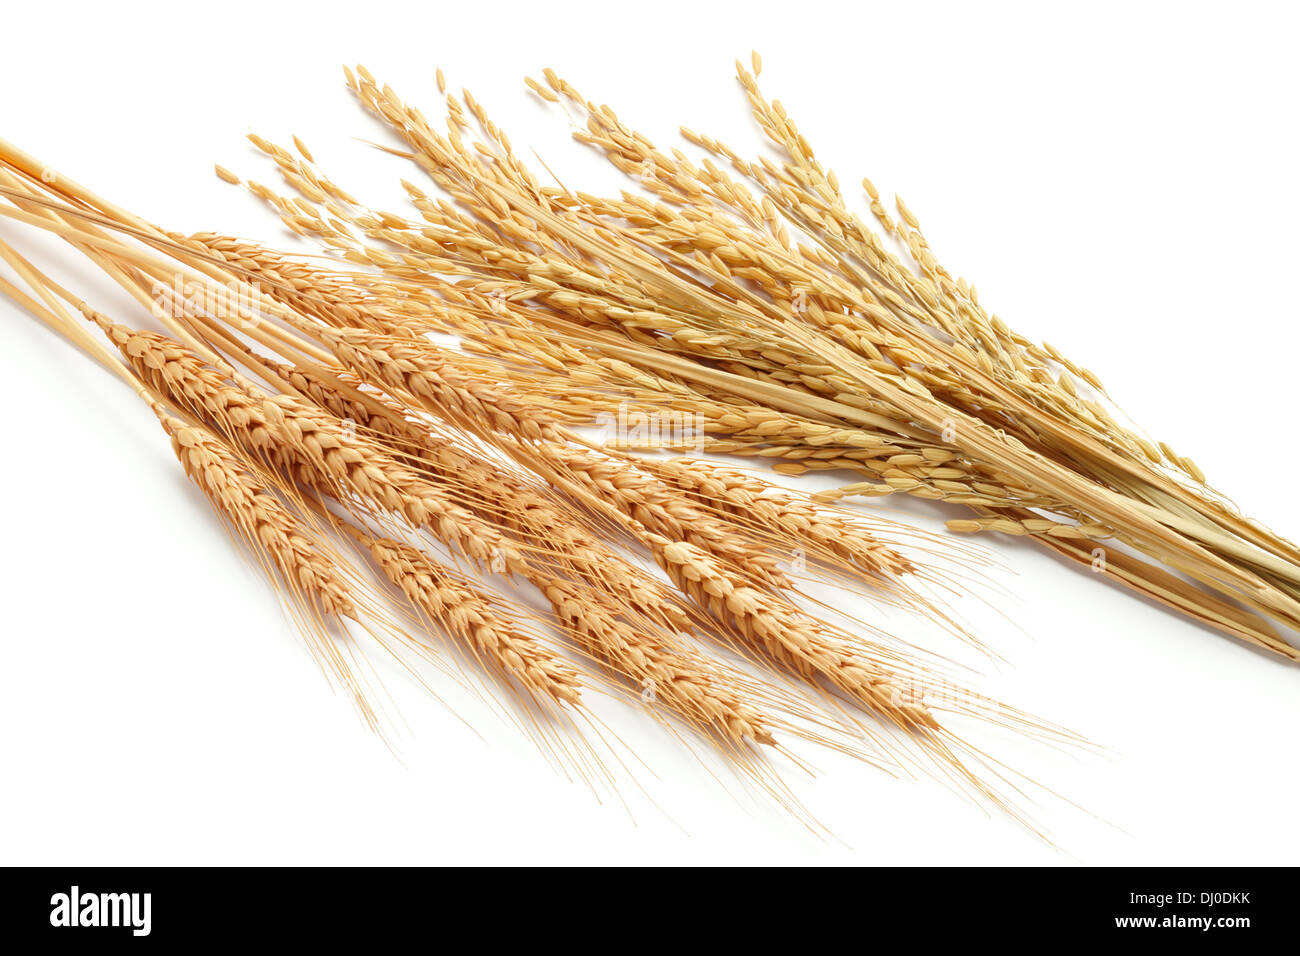 wheat ears (triticum) and rice plants (oryza) isolated on white Stock Photo